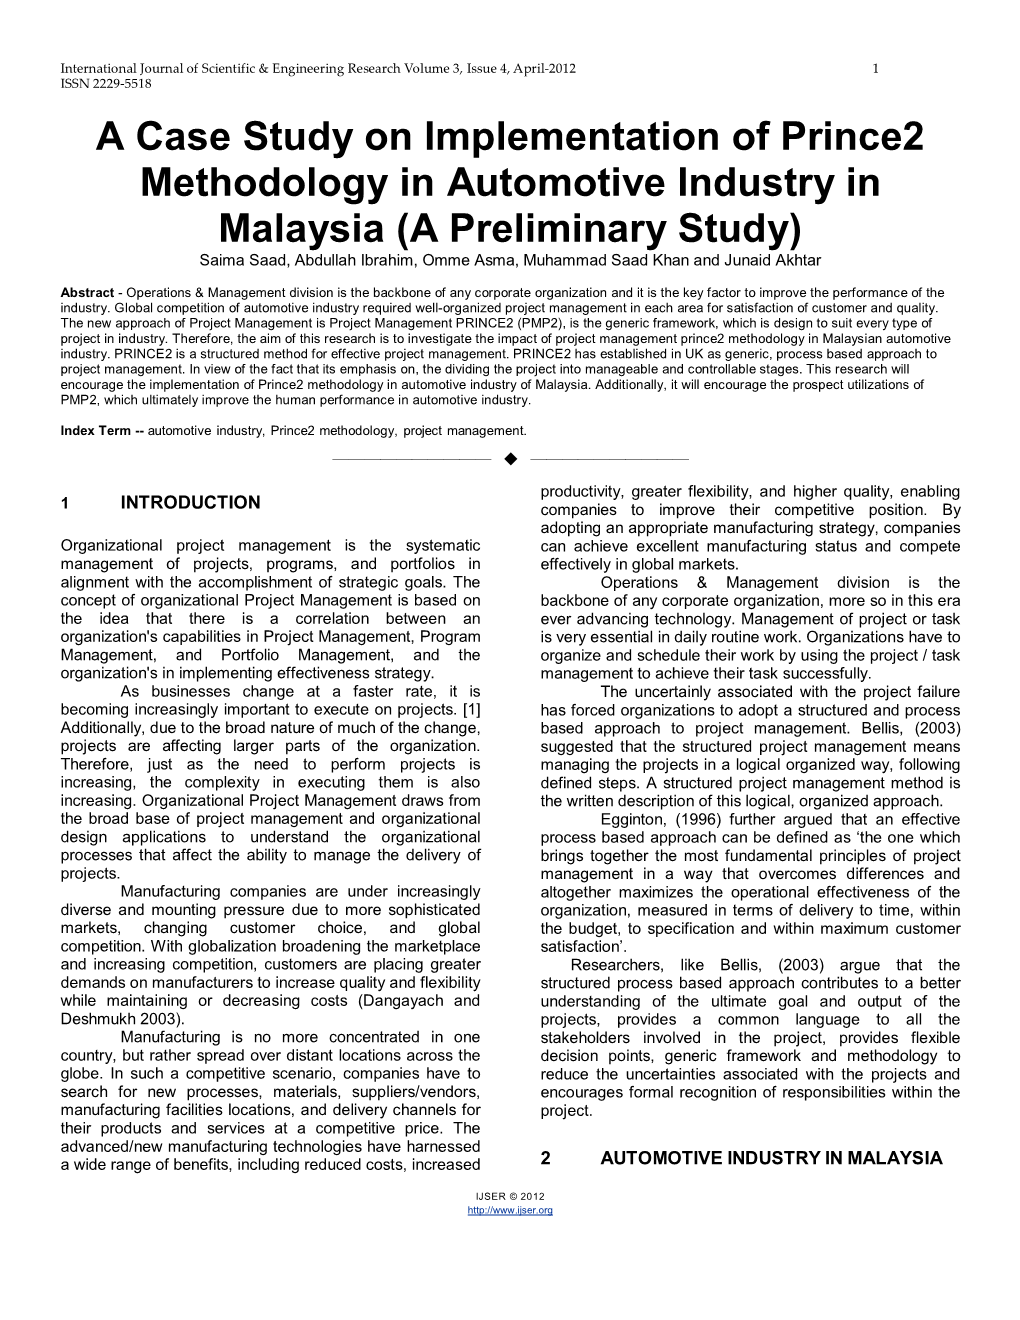 A Case Study on Implementation of Prince2 Methodology in Automotive